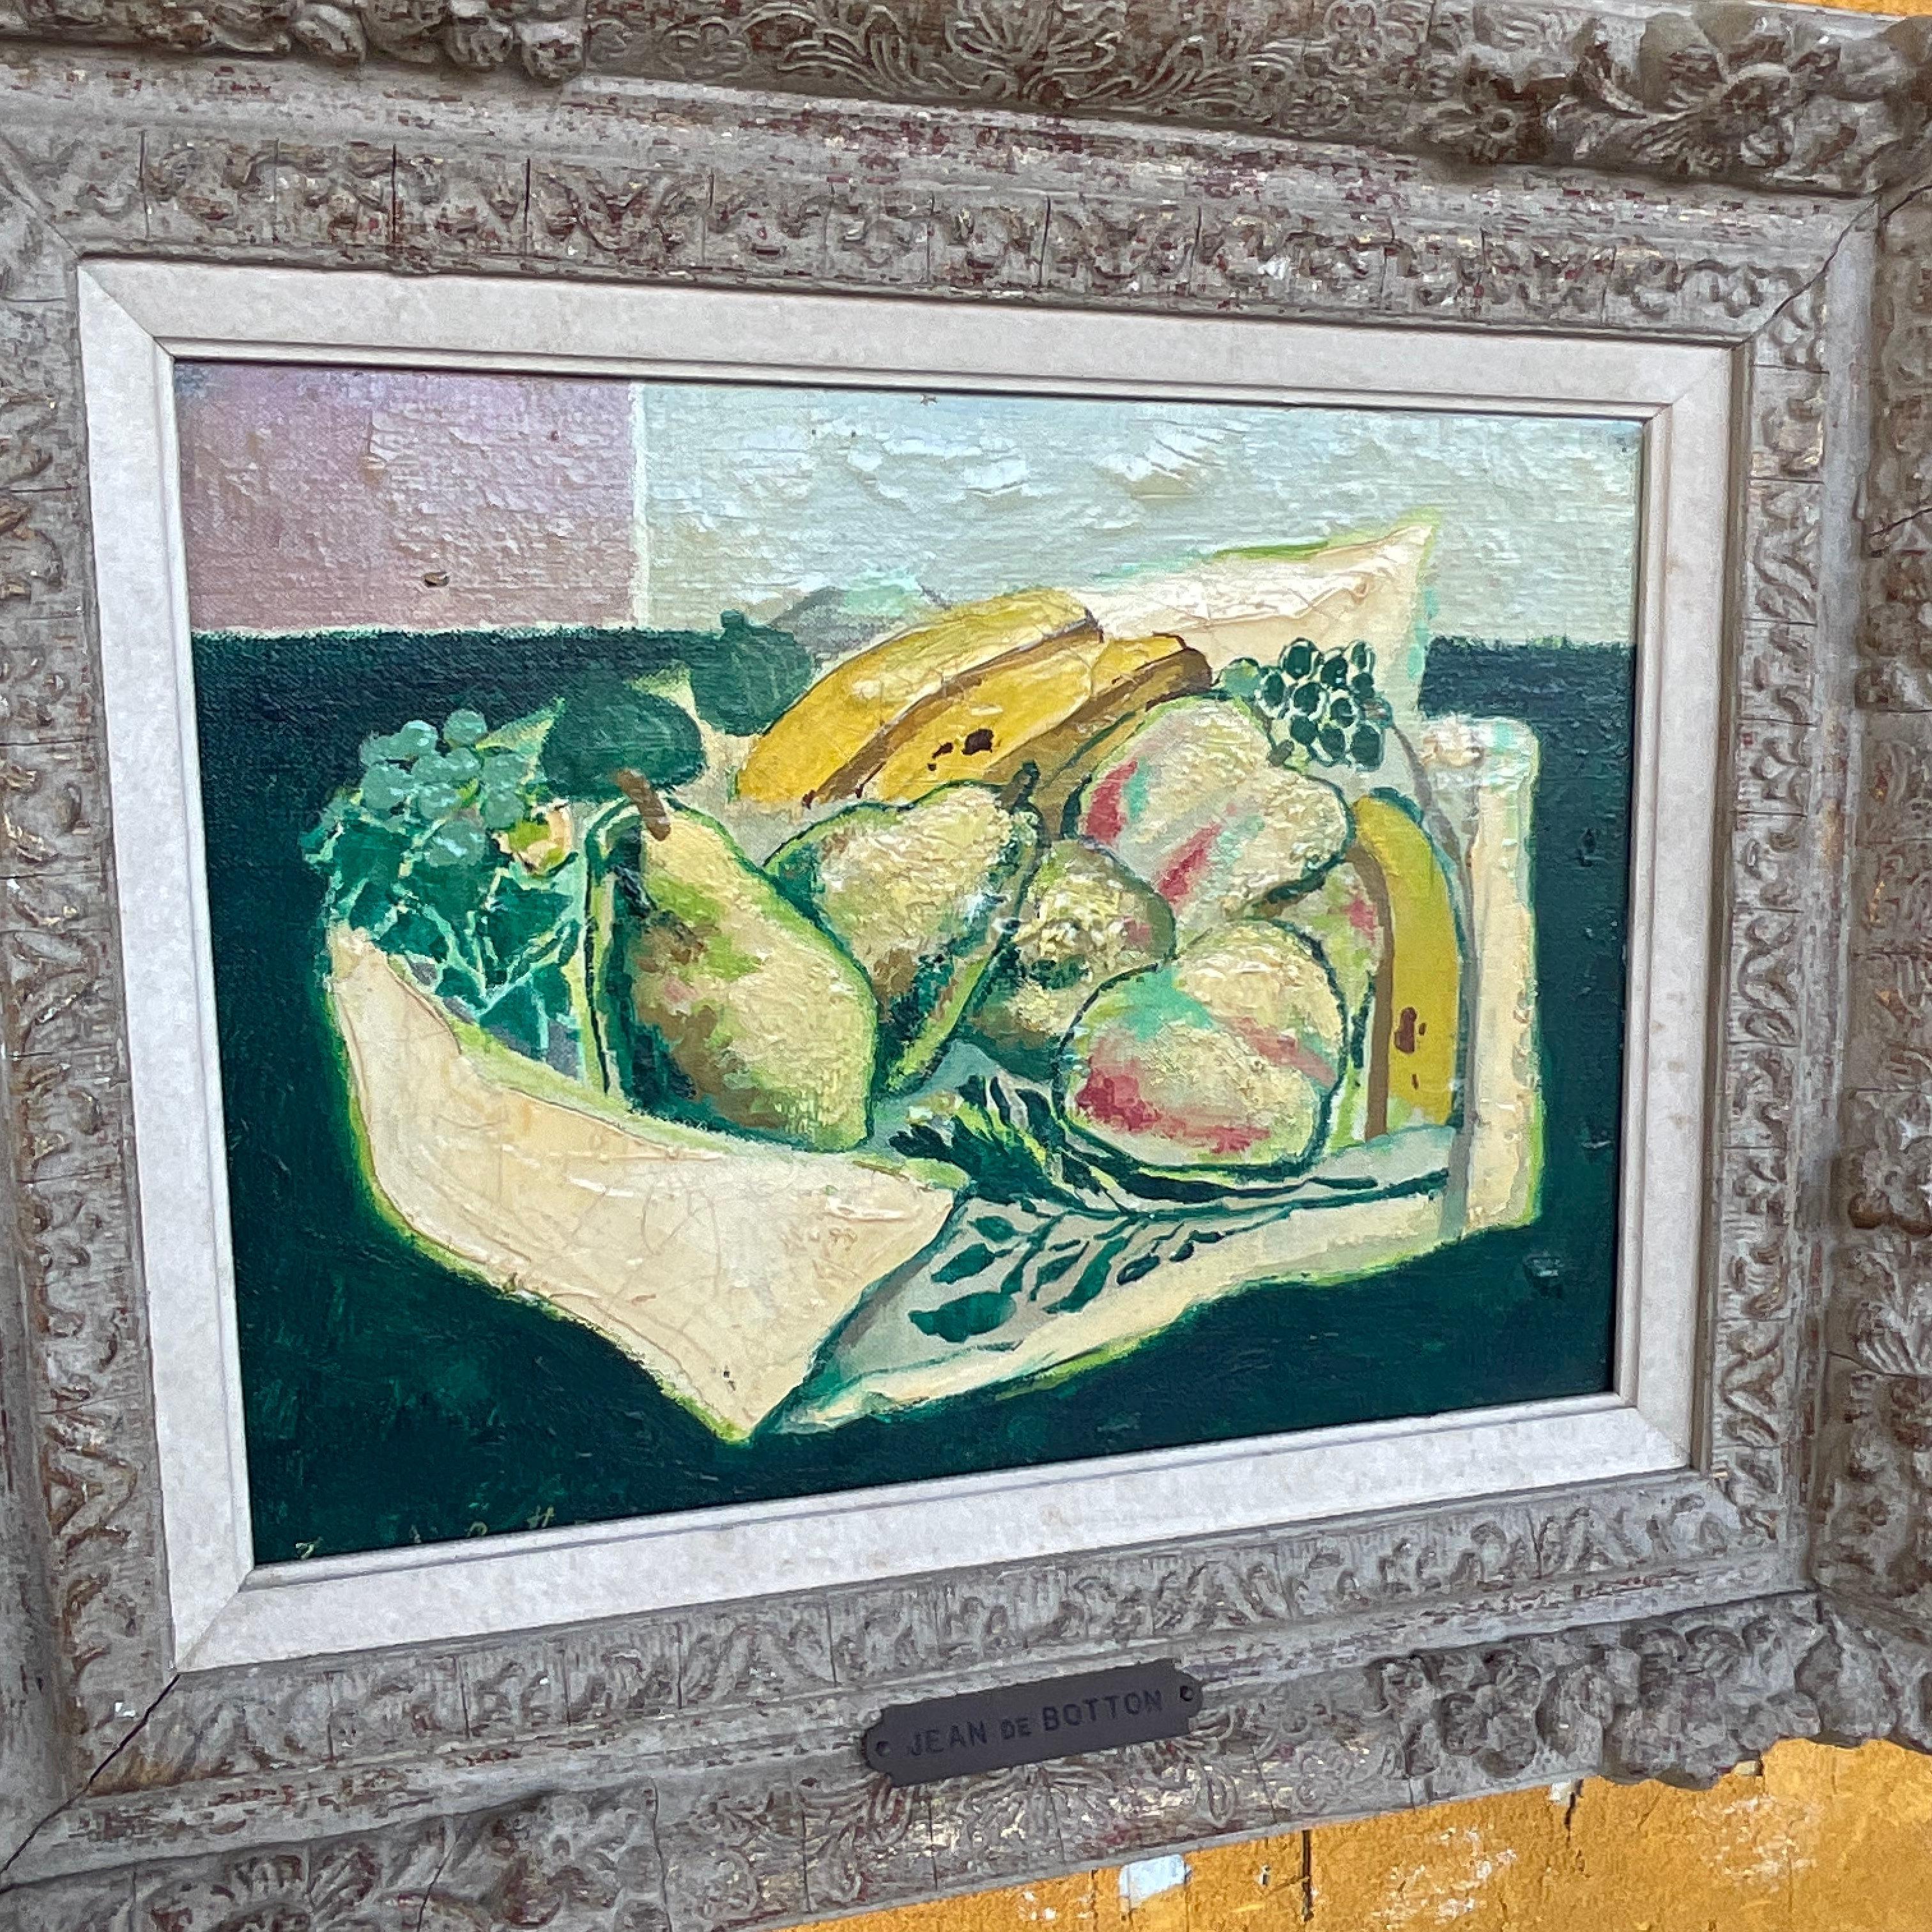 Experience classic elegance with our Vintage Regency Jean de Bottom Still Life On Canvas. This exquisite piece by Jean de Bottom captures the timeless beauty of still life, rendered in meticulous detail on canvas. A sophisticated addition to any art